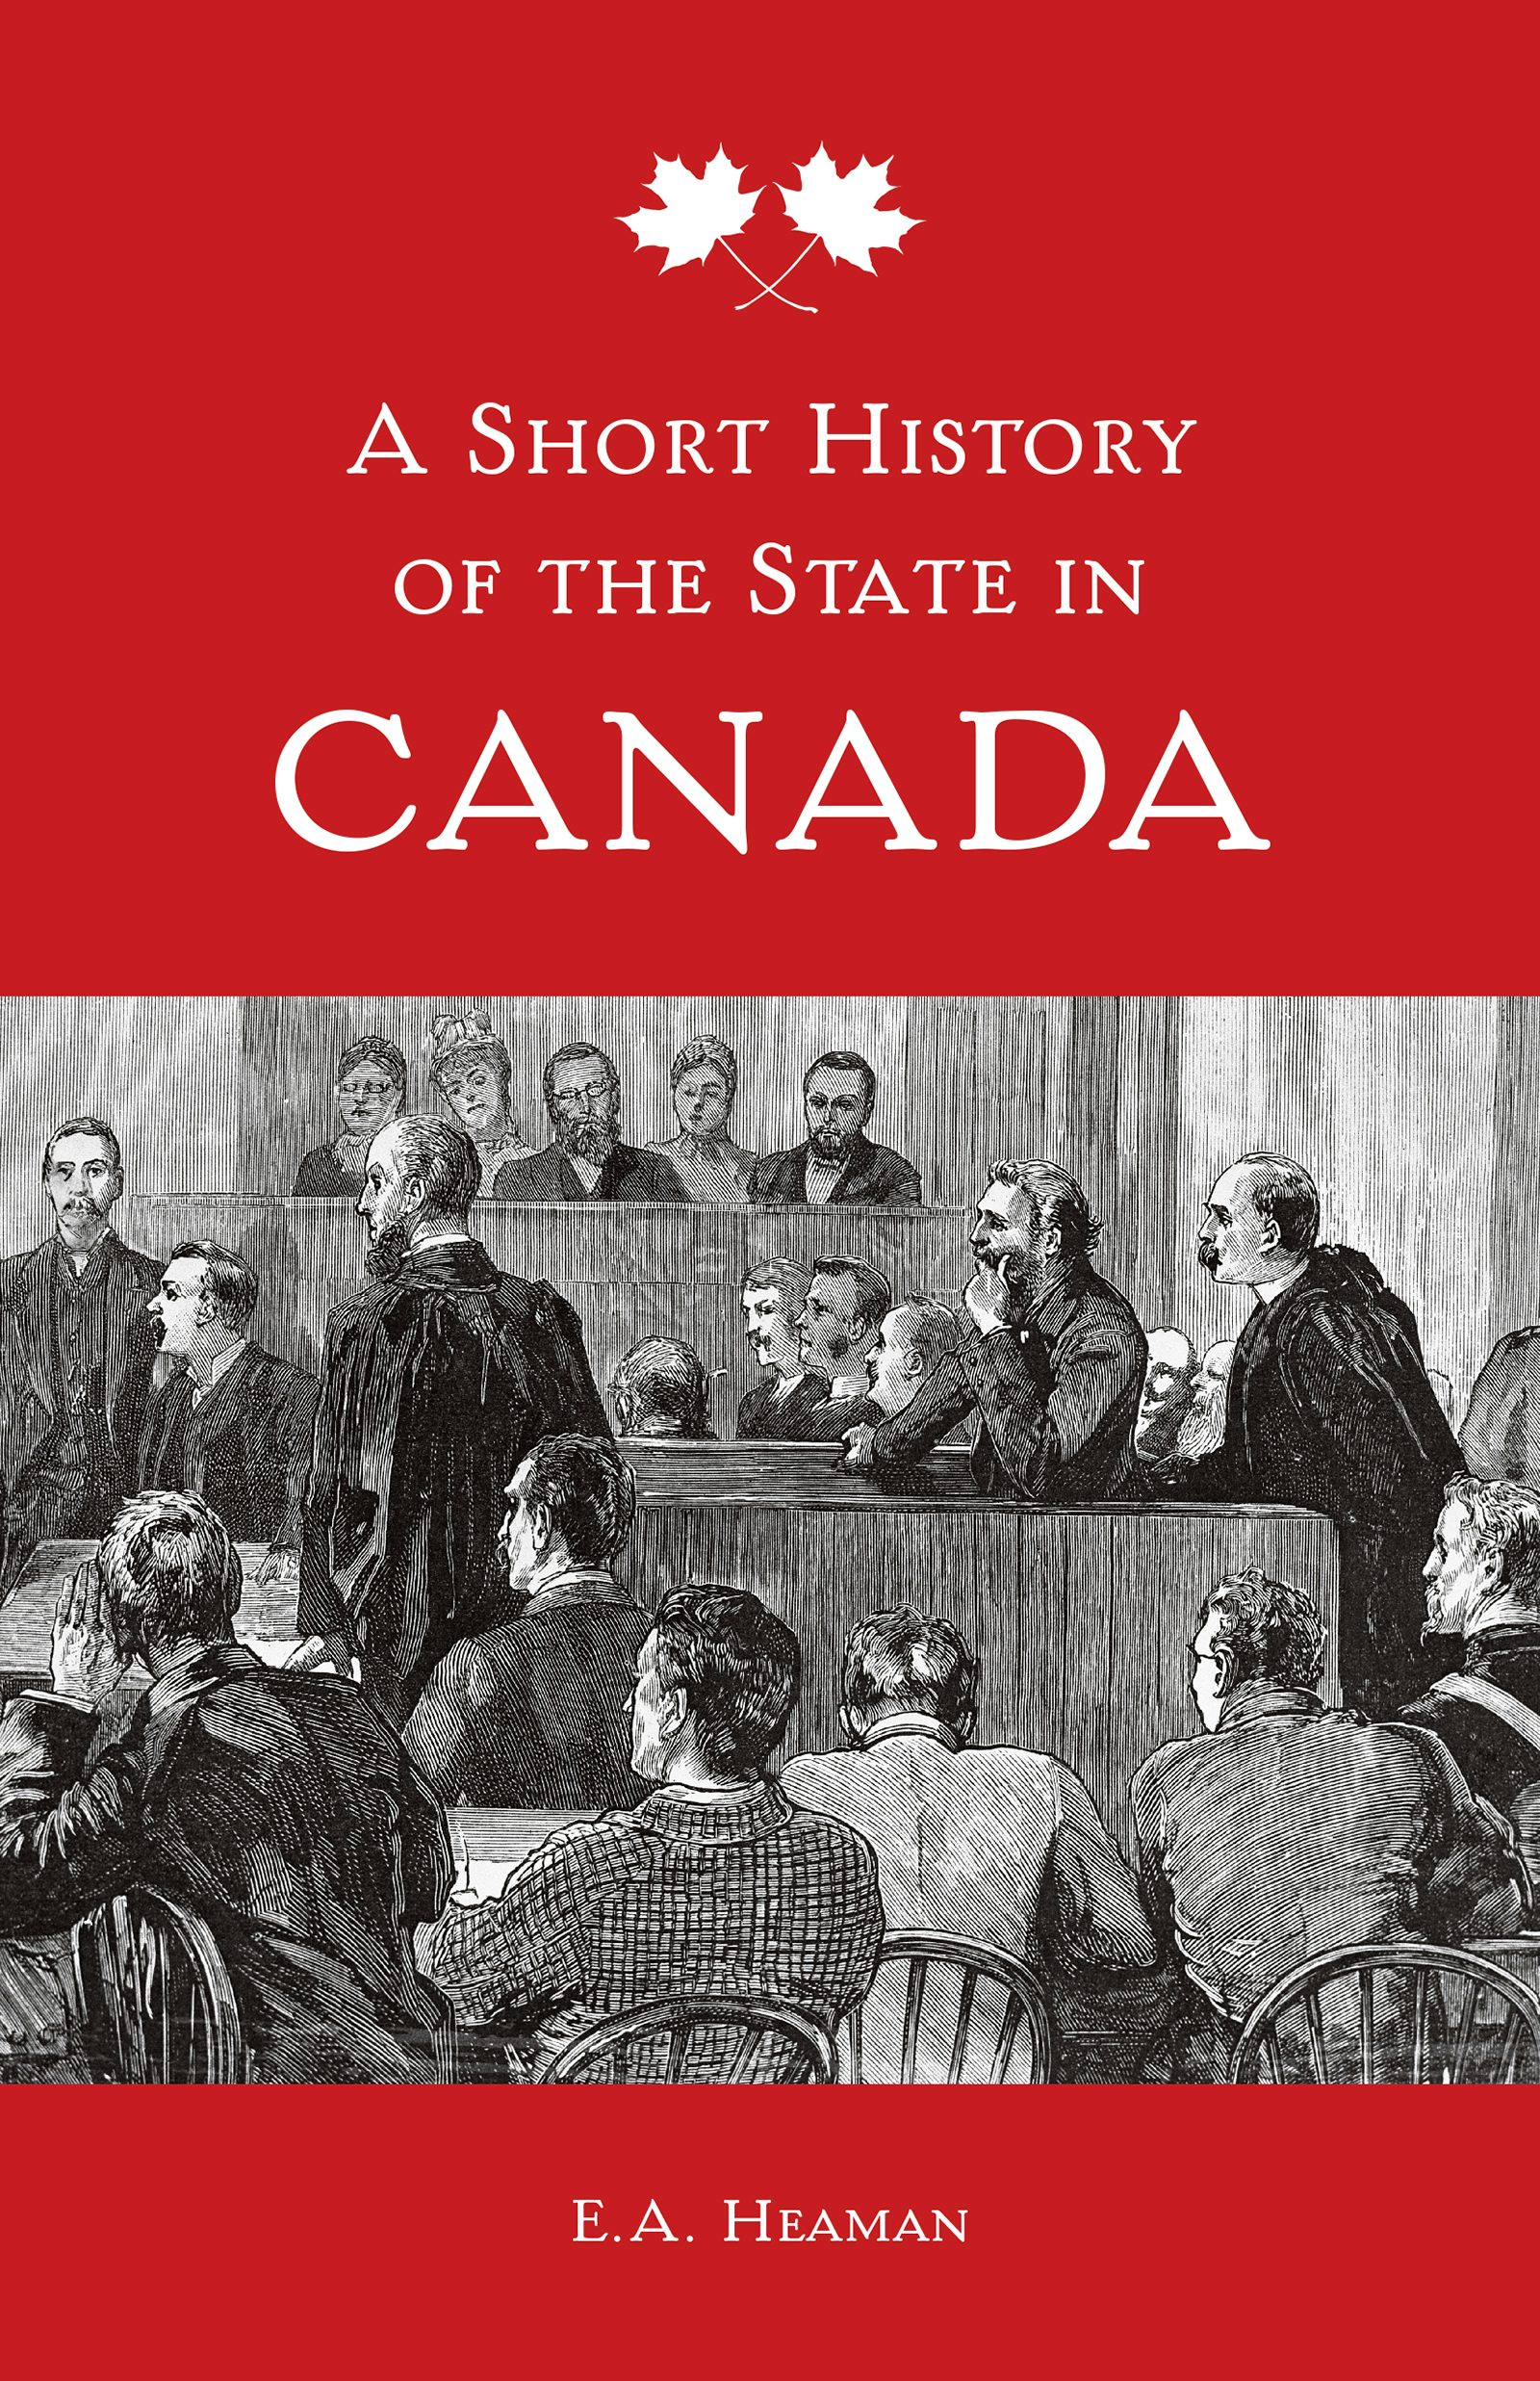 University of Toronto Press - A Short History of the State in Canada